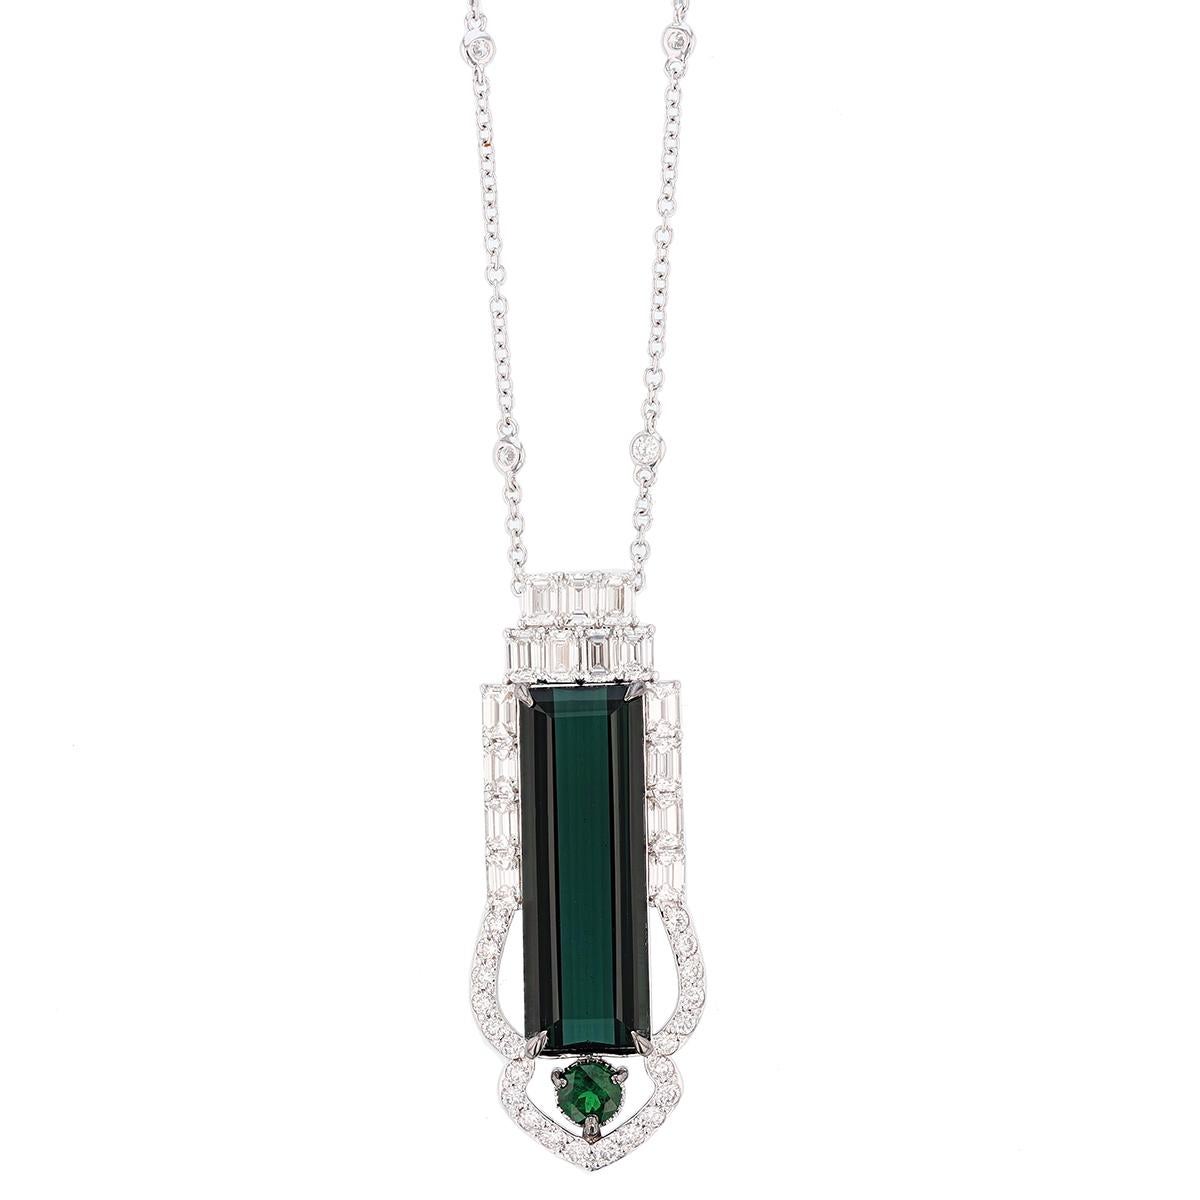 The pendant is made in 14 karat white gold and features a 12.36 carat GIA certified (certification nember: 5171239519) octagonal cut green tourmaline prong set surrounded by 26 round cut diamonds weighing 0.60ctw total weight color grade (G) clarity